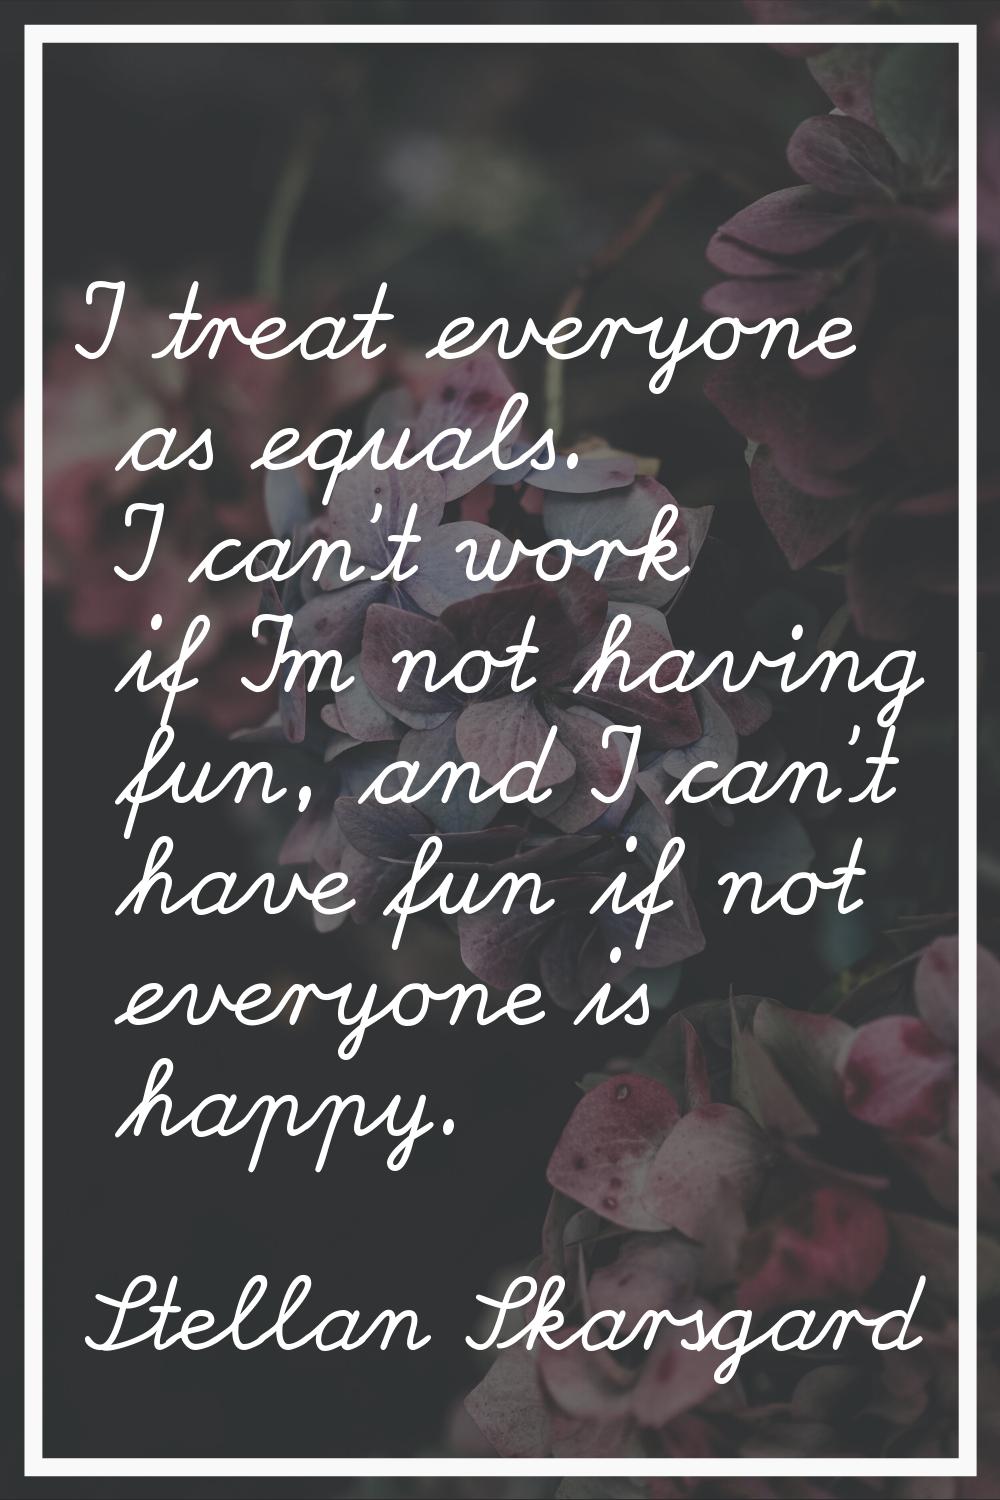 I treat everyone as equals. I can't work if I'm not having fun, and I can't have fun if not everyon